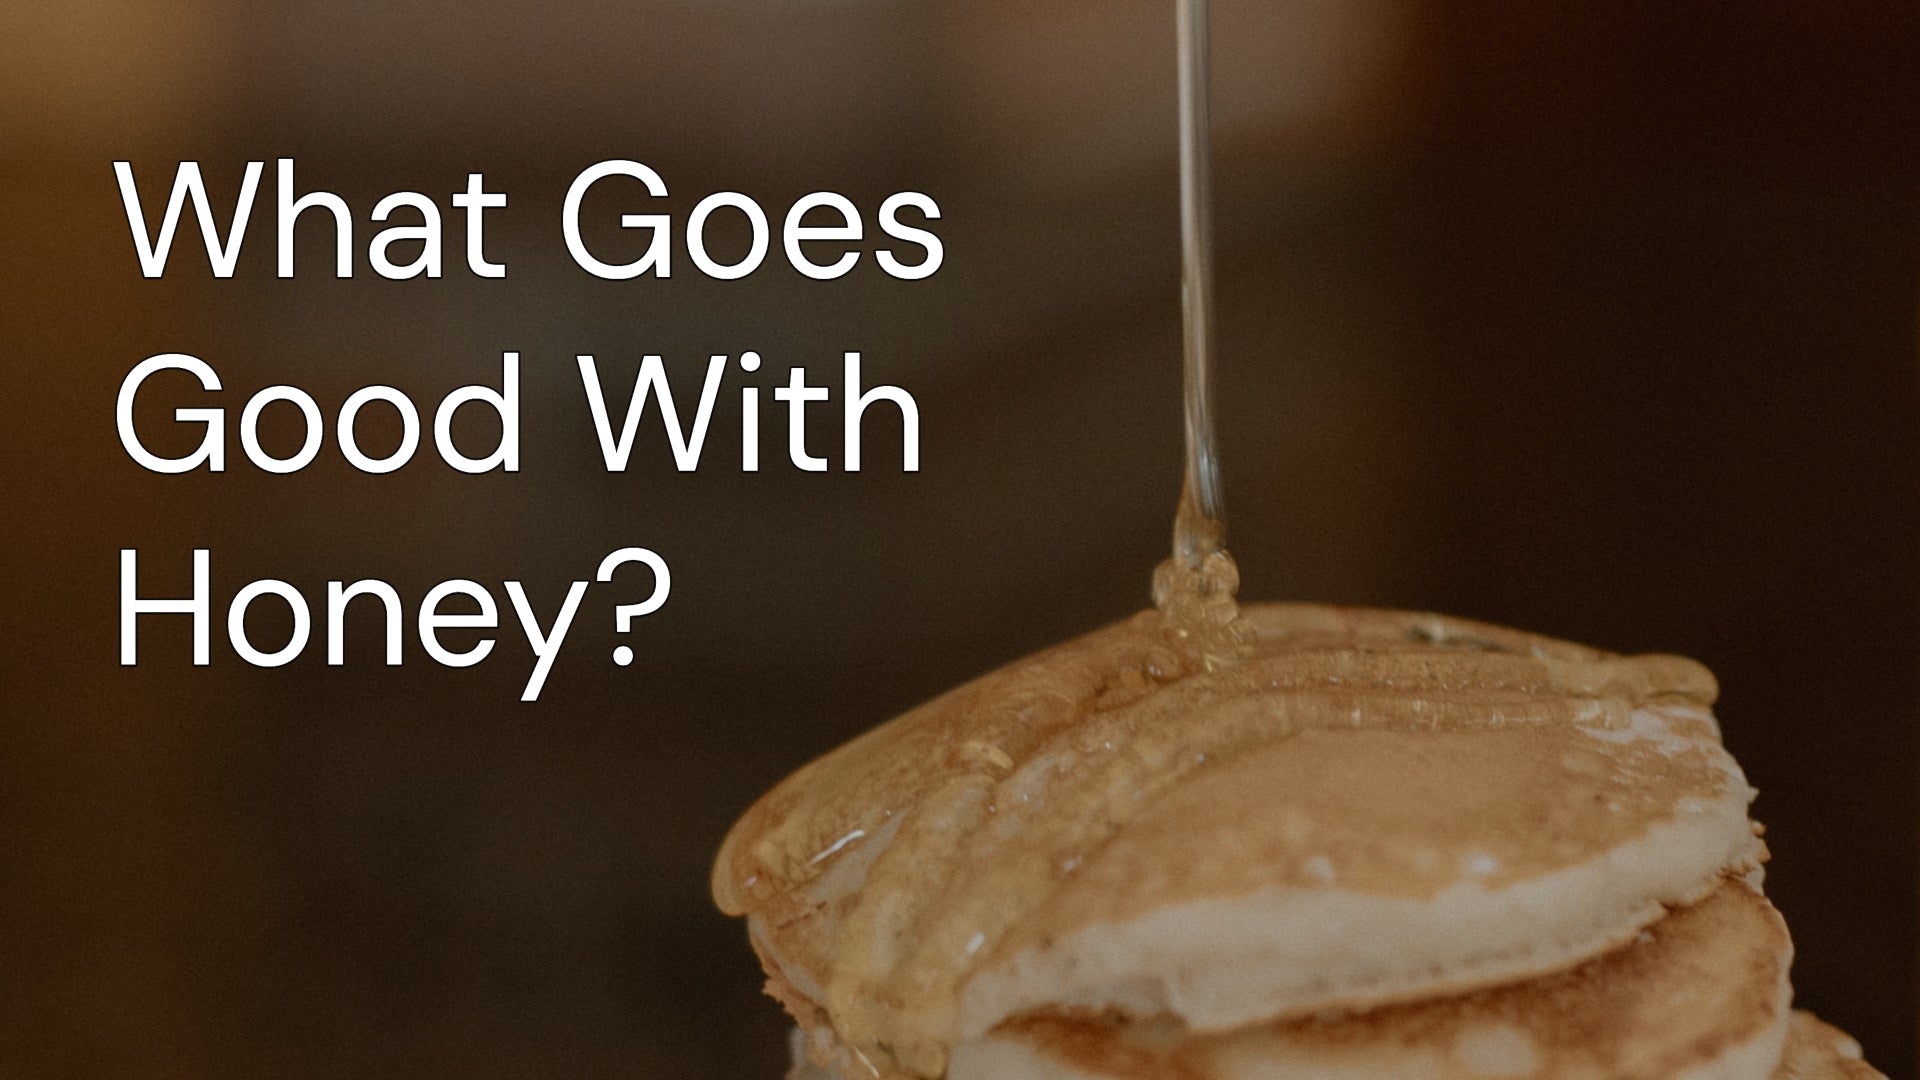 What Goes Good With Honey?